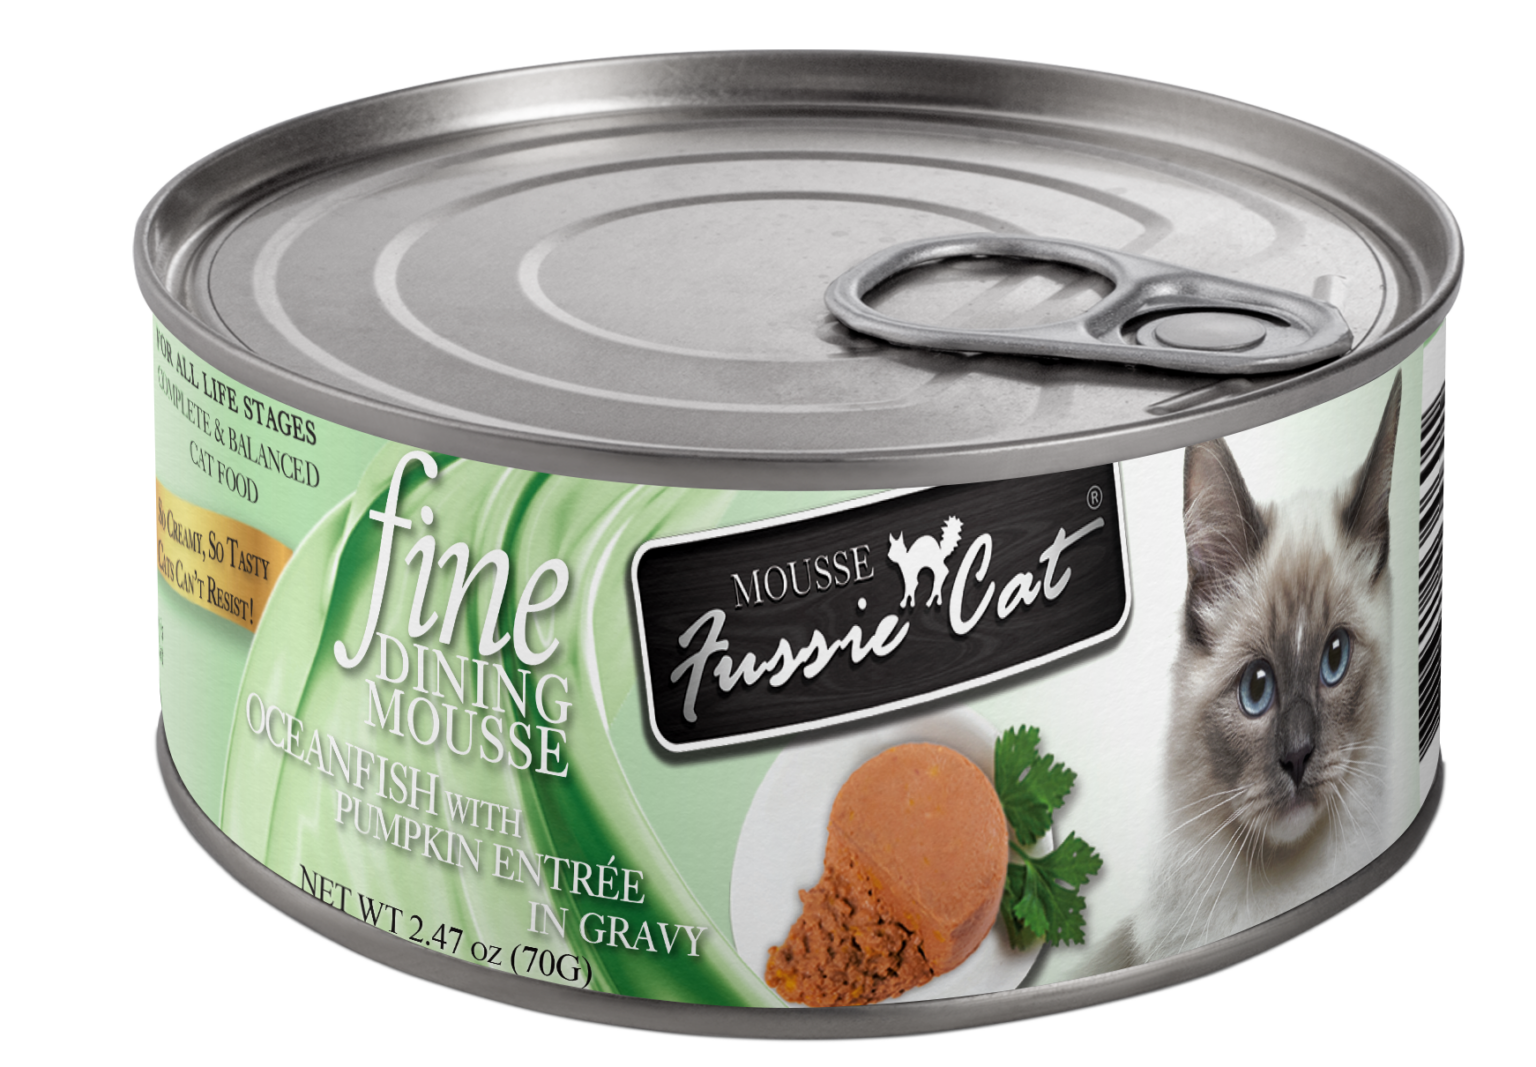 Fussie Cat Fine Dining Canned Ocean Fish With Pumpkin Entree 2.47oz